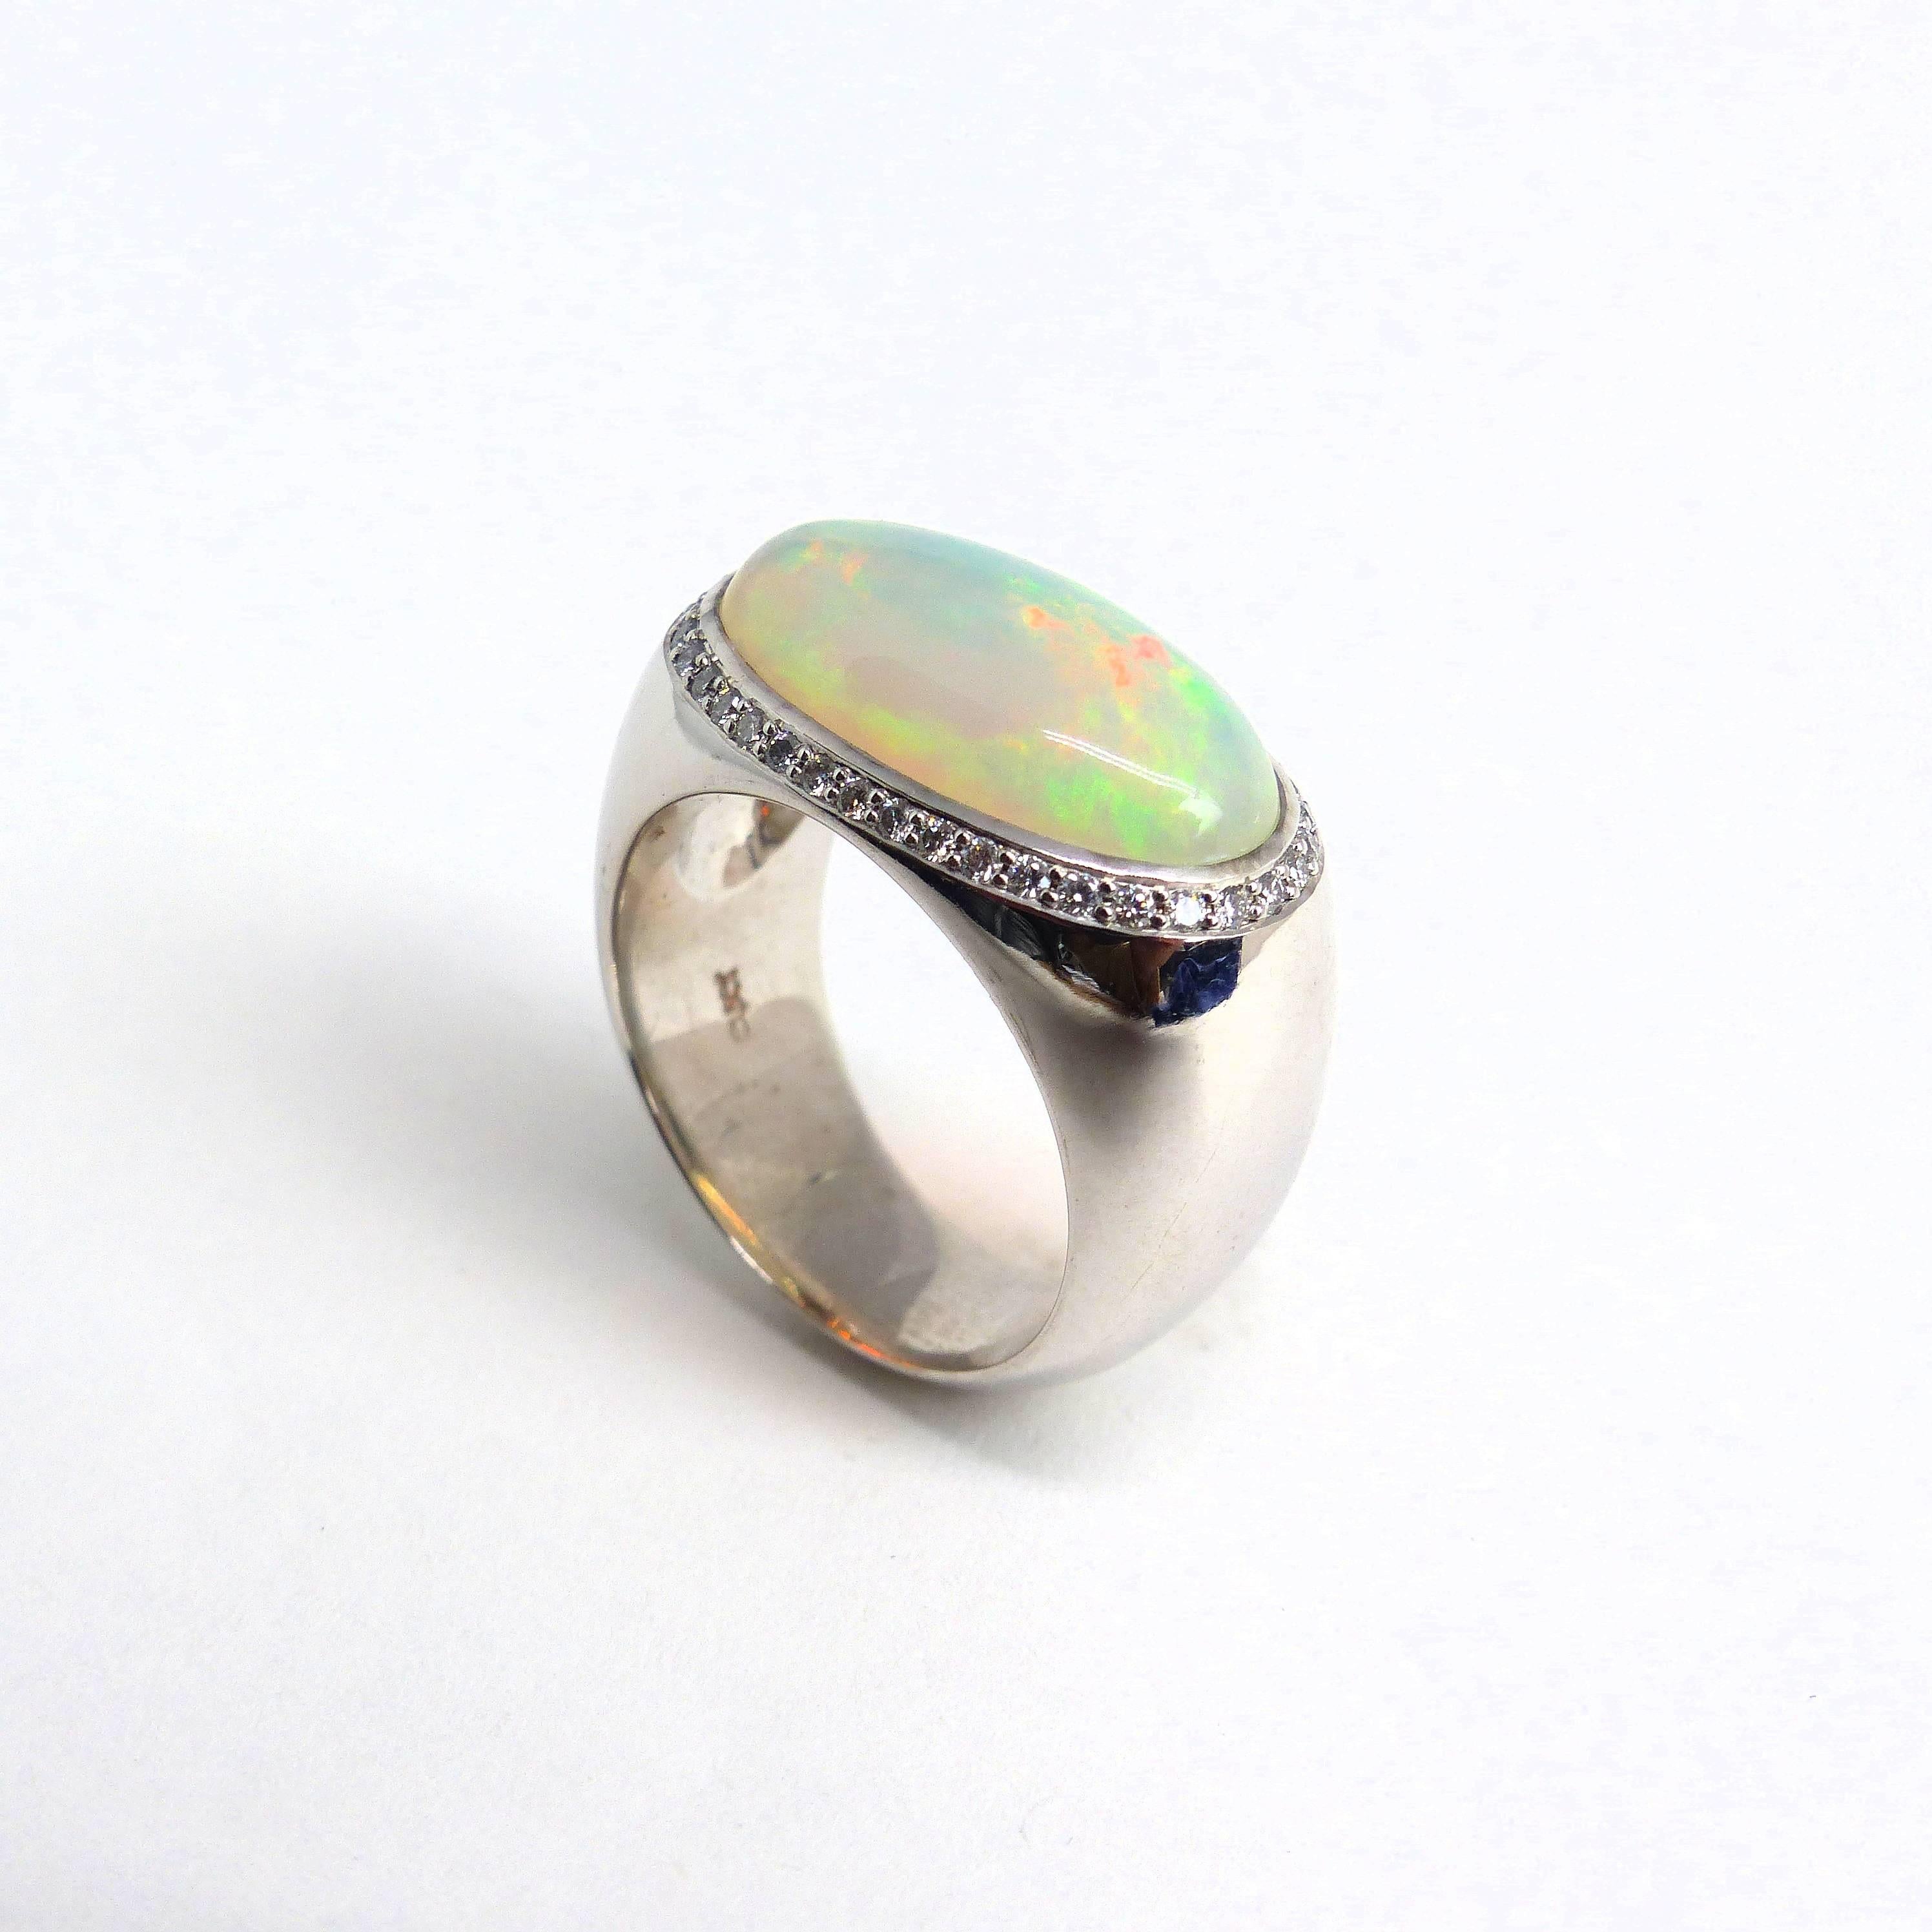 Thomas Leyser is renowned for his contemporary jewellery designs utilizing fine coloured gemstones and diamonds. 

This ring in 18k white gold (15.5g) is set with 1x fine White Opal Cabouchon (oval, 18x10mm, 5.30ct) + 38x Diamonds (brillant-cut,